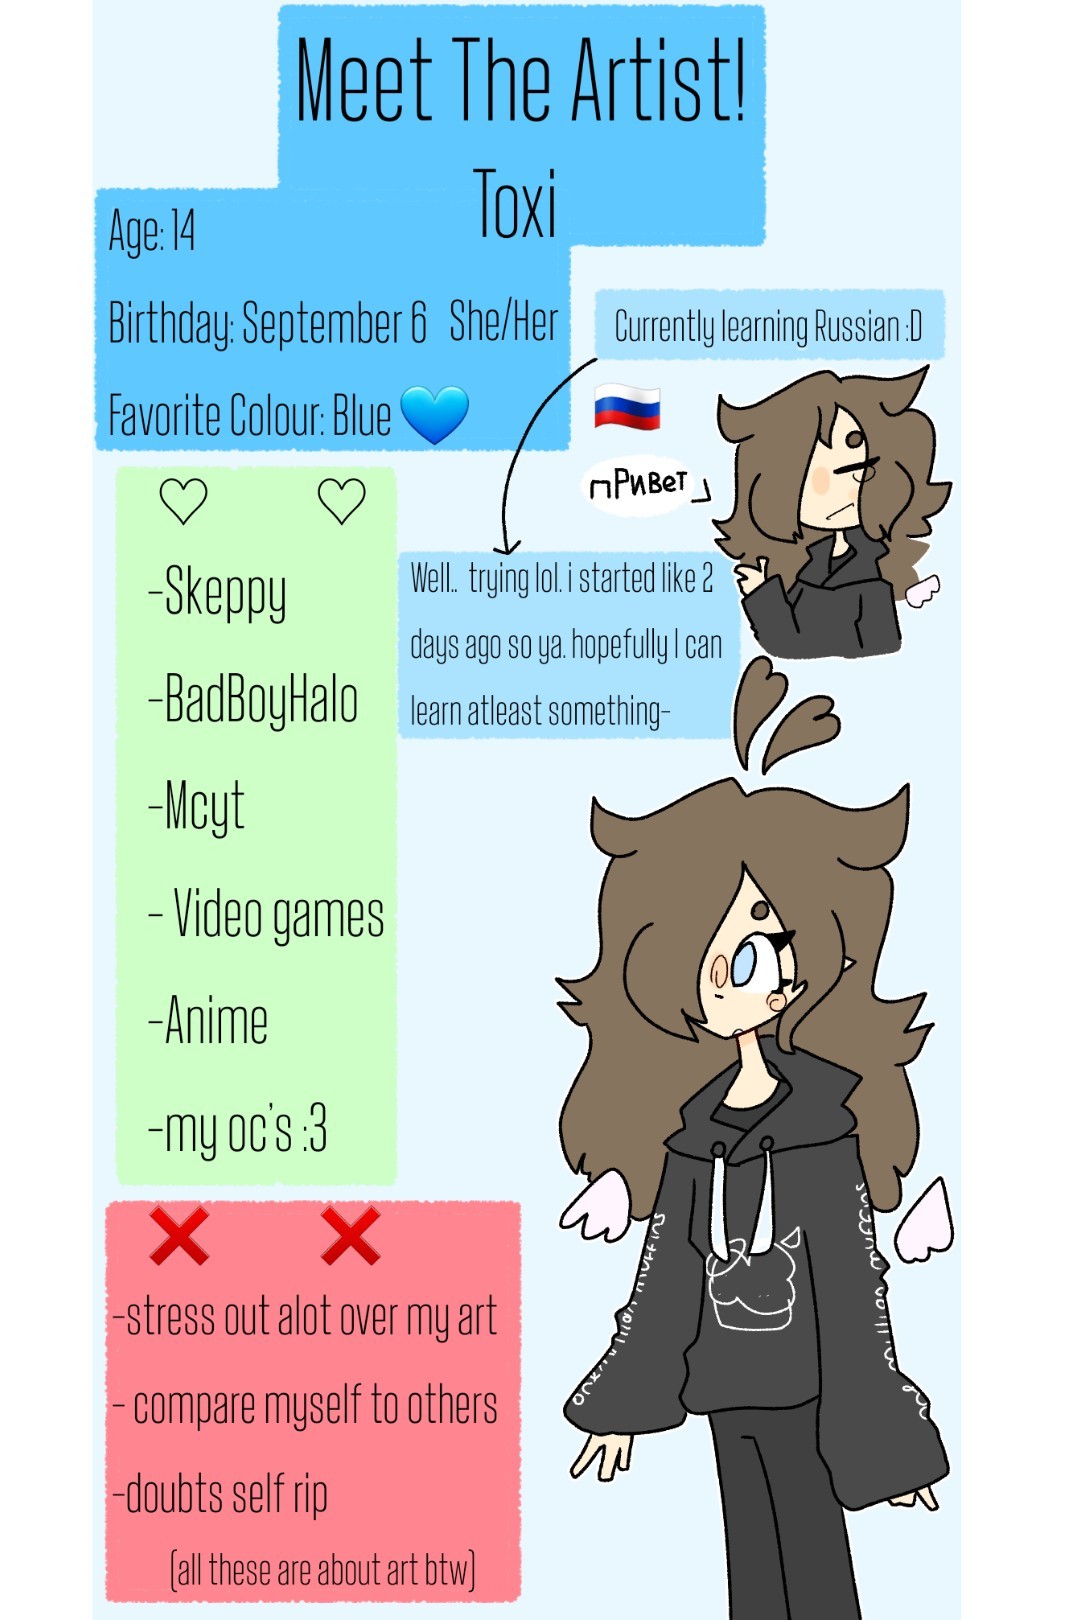 tappp
mm tastey meet the artist for the one person interested about me/my art on here lol